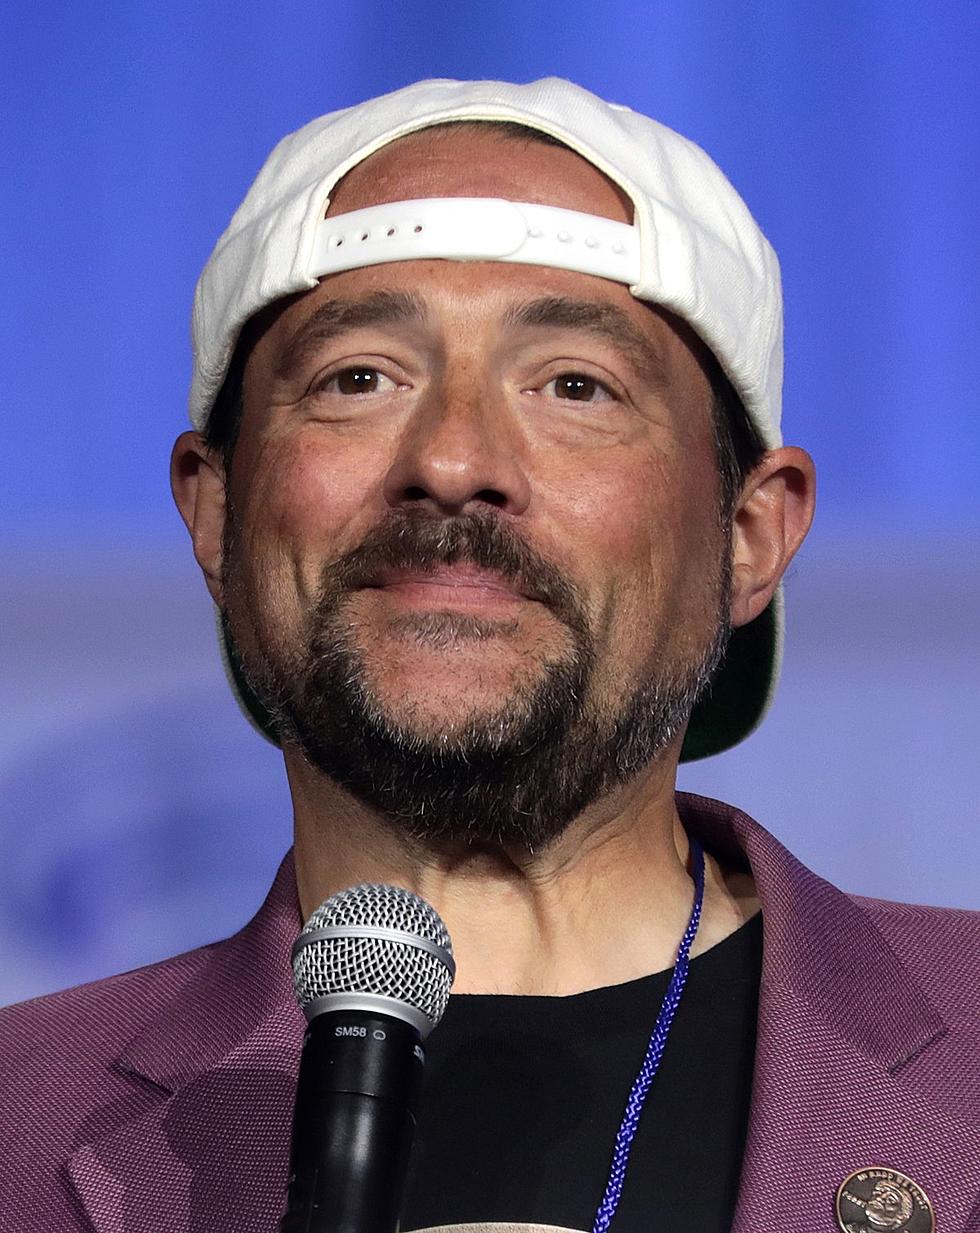 NJ's Kevin Smith: 'Take that dream right up until the end, kids'